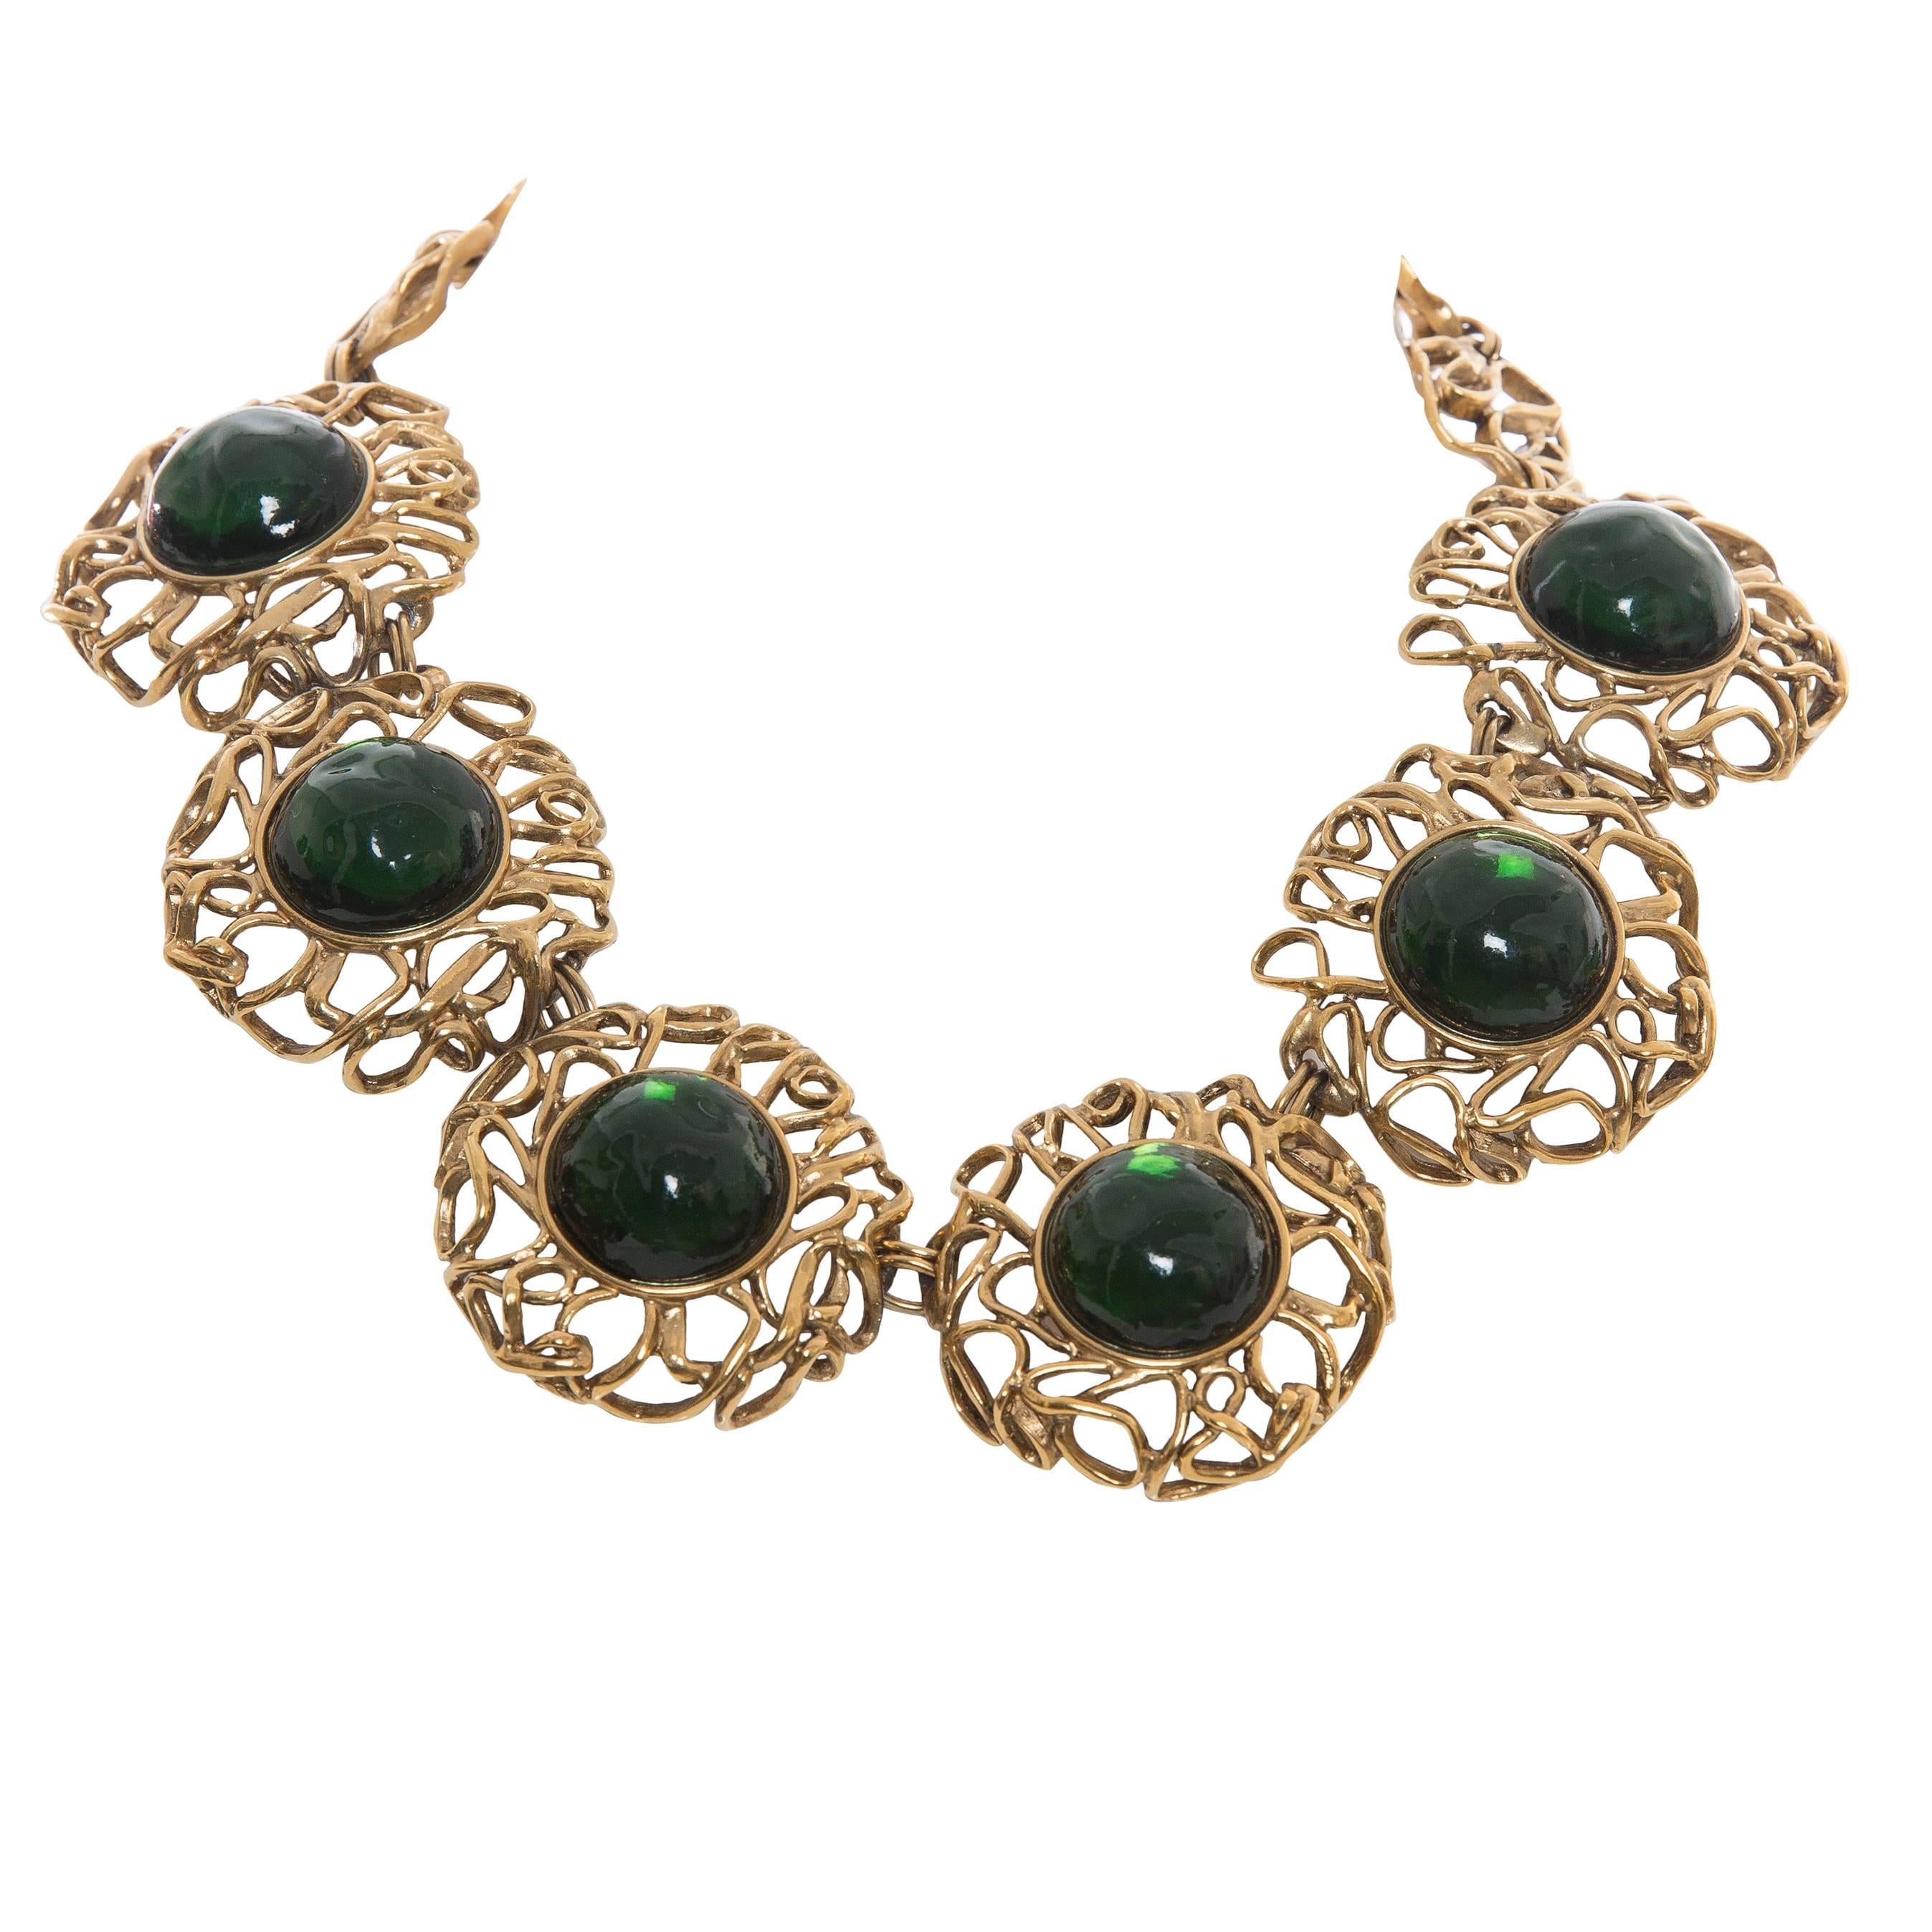 Yves Saint Laurent Gilt Metal & Green Glass Cabochon Necklace, Circa: 1980s For Sale 1